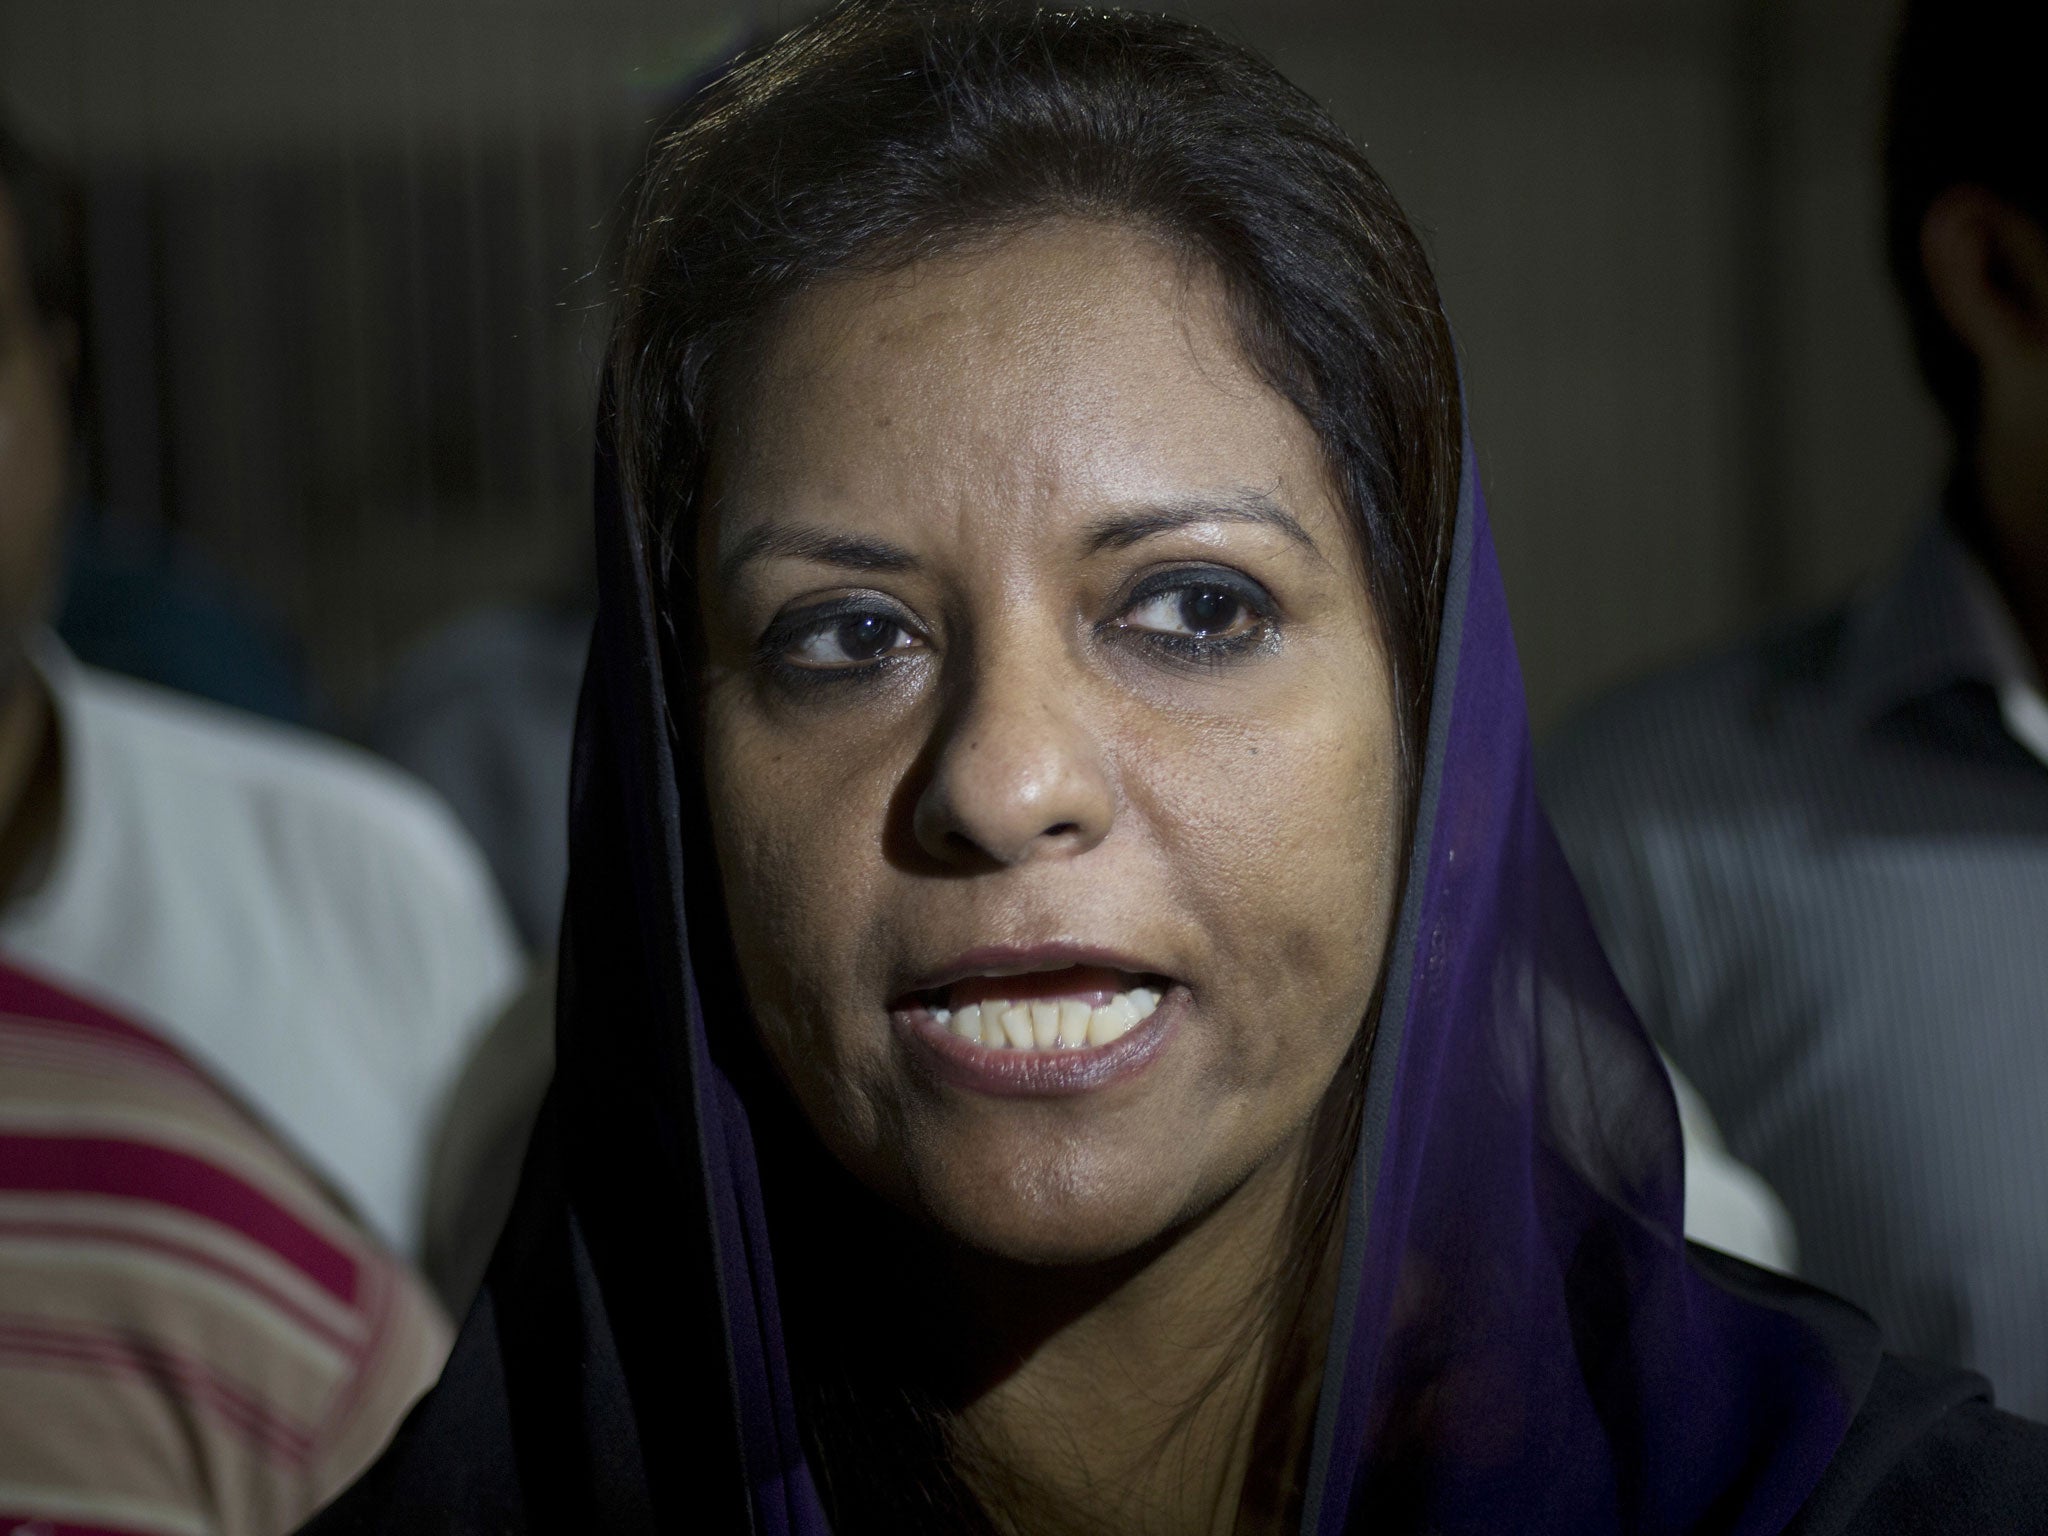 Pakistan's opposition MP Nafeesa Shah said the new law was an improvement